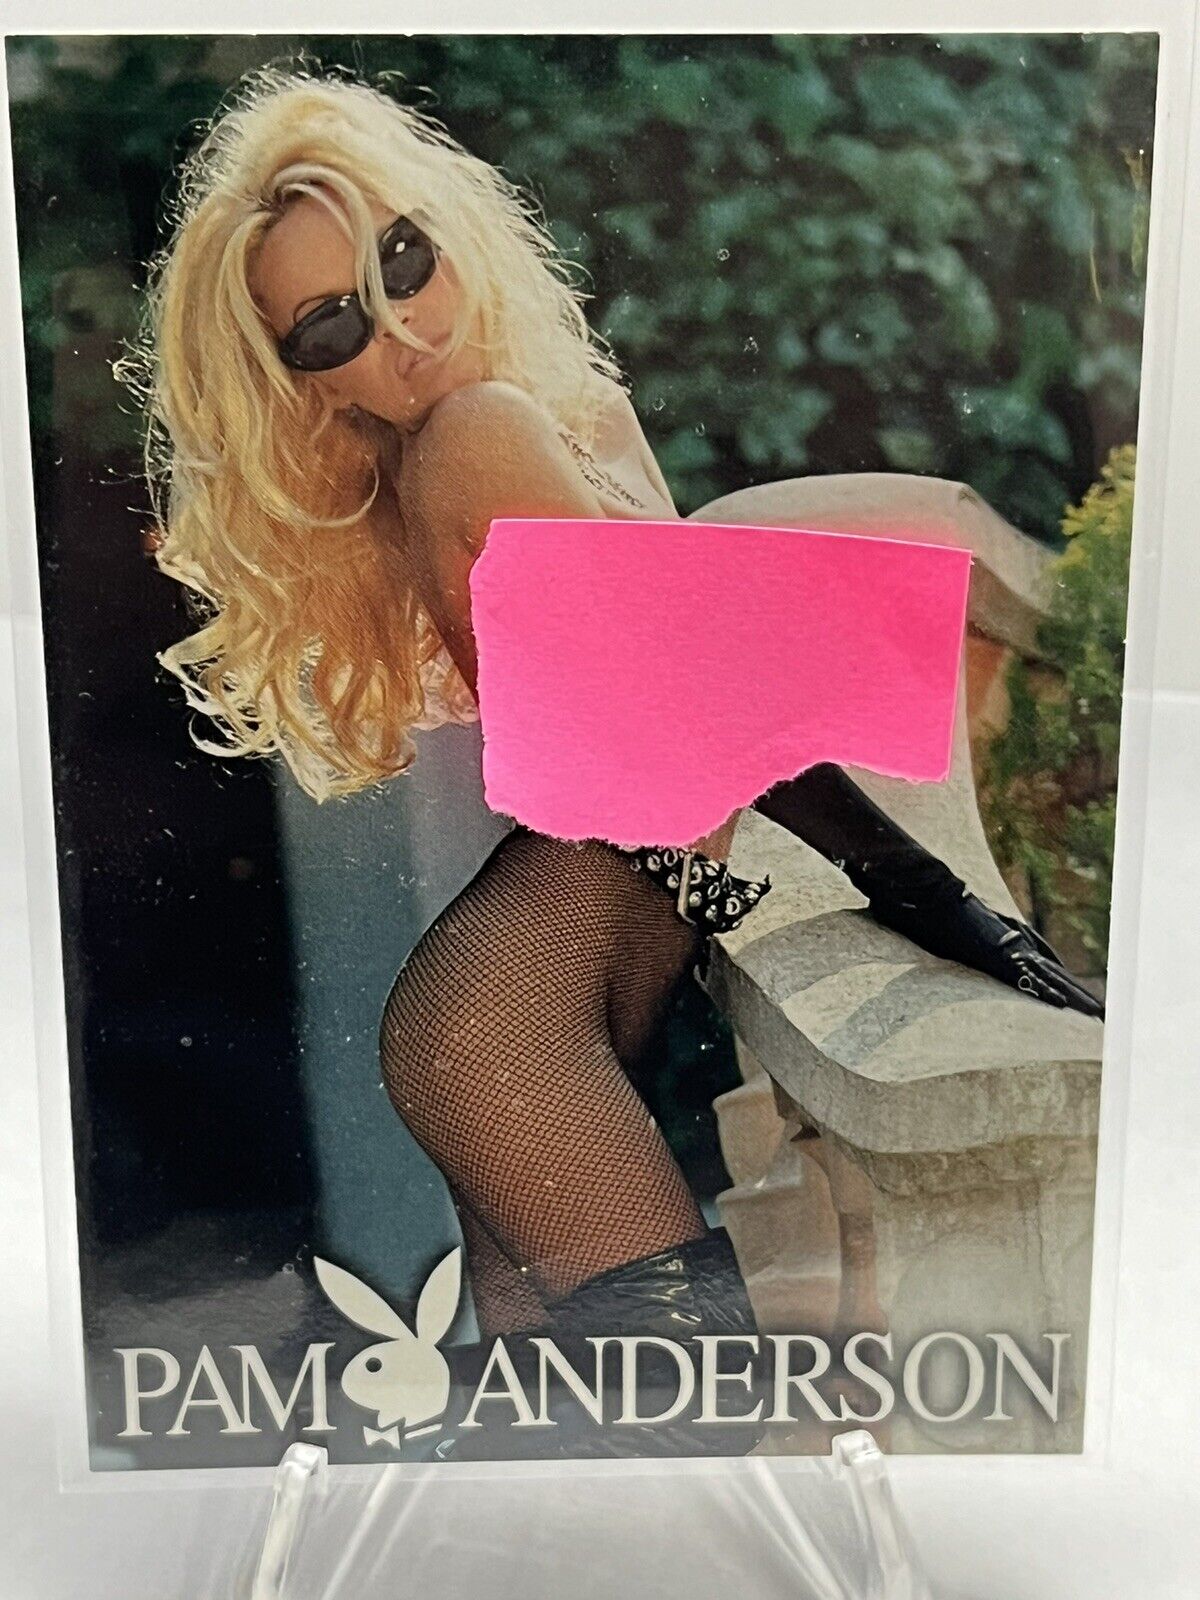 1996 Sports Time Playboy Best of Pam Anderson #85 Pamela Anderson